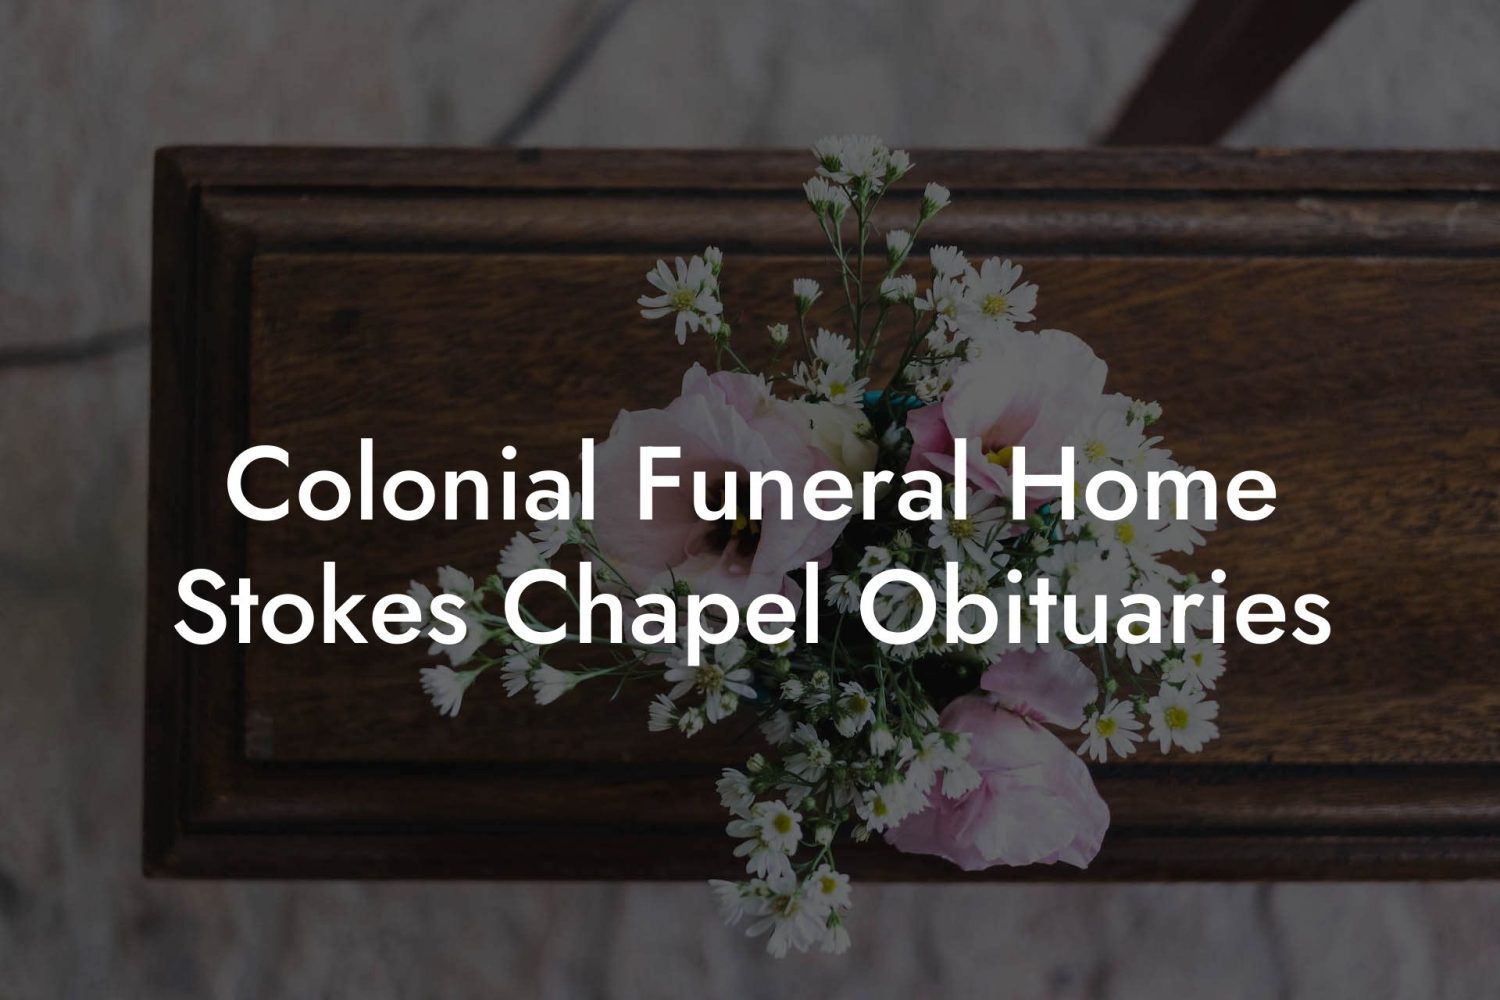 Colonial Funeral Home Stokes Chapel Obituaries - Eulogy Assistant